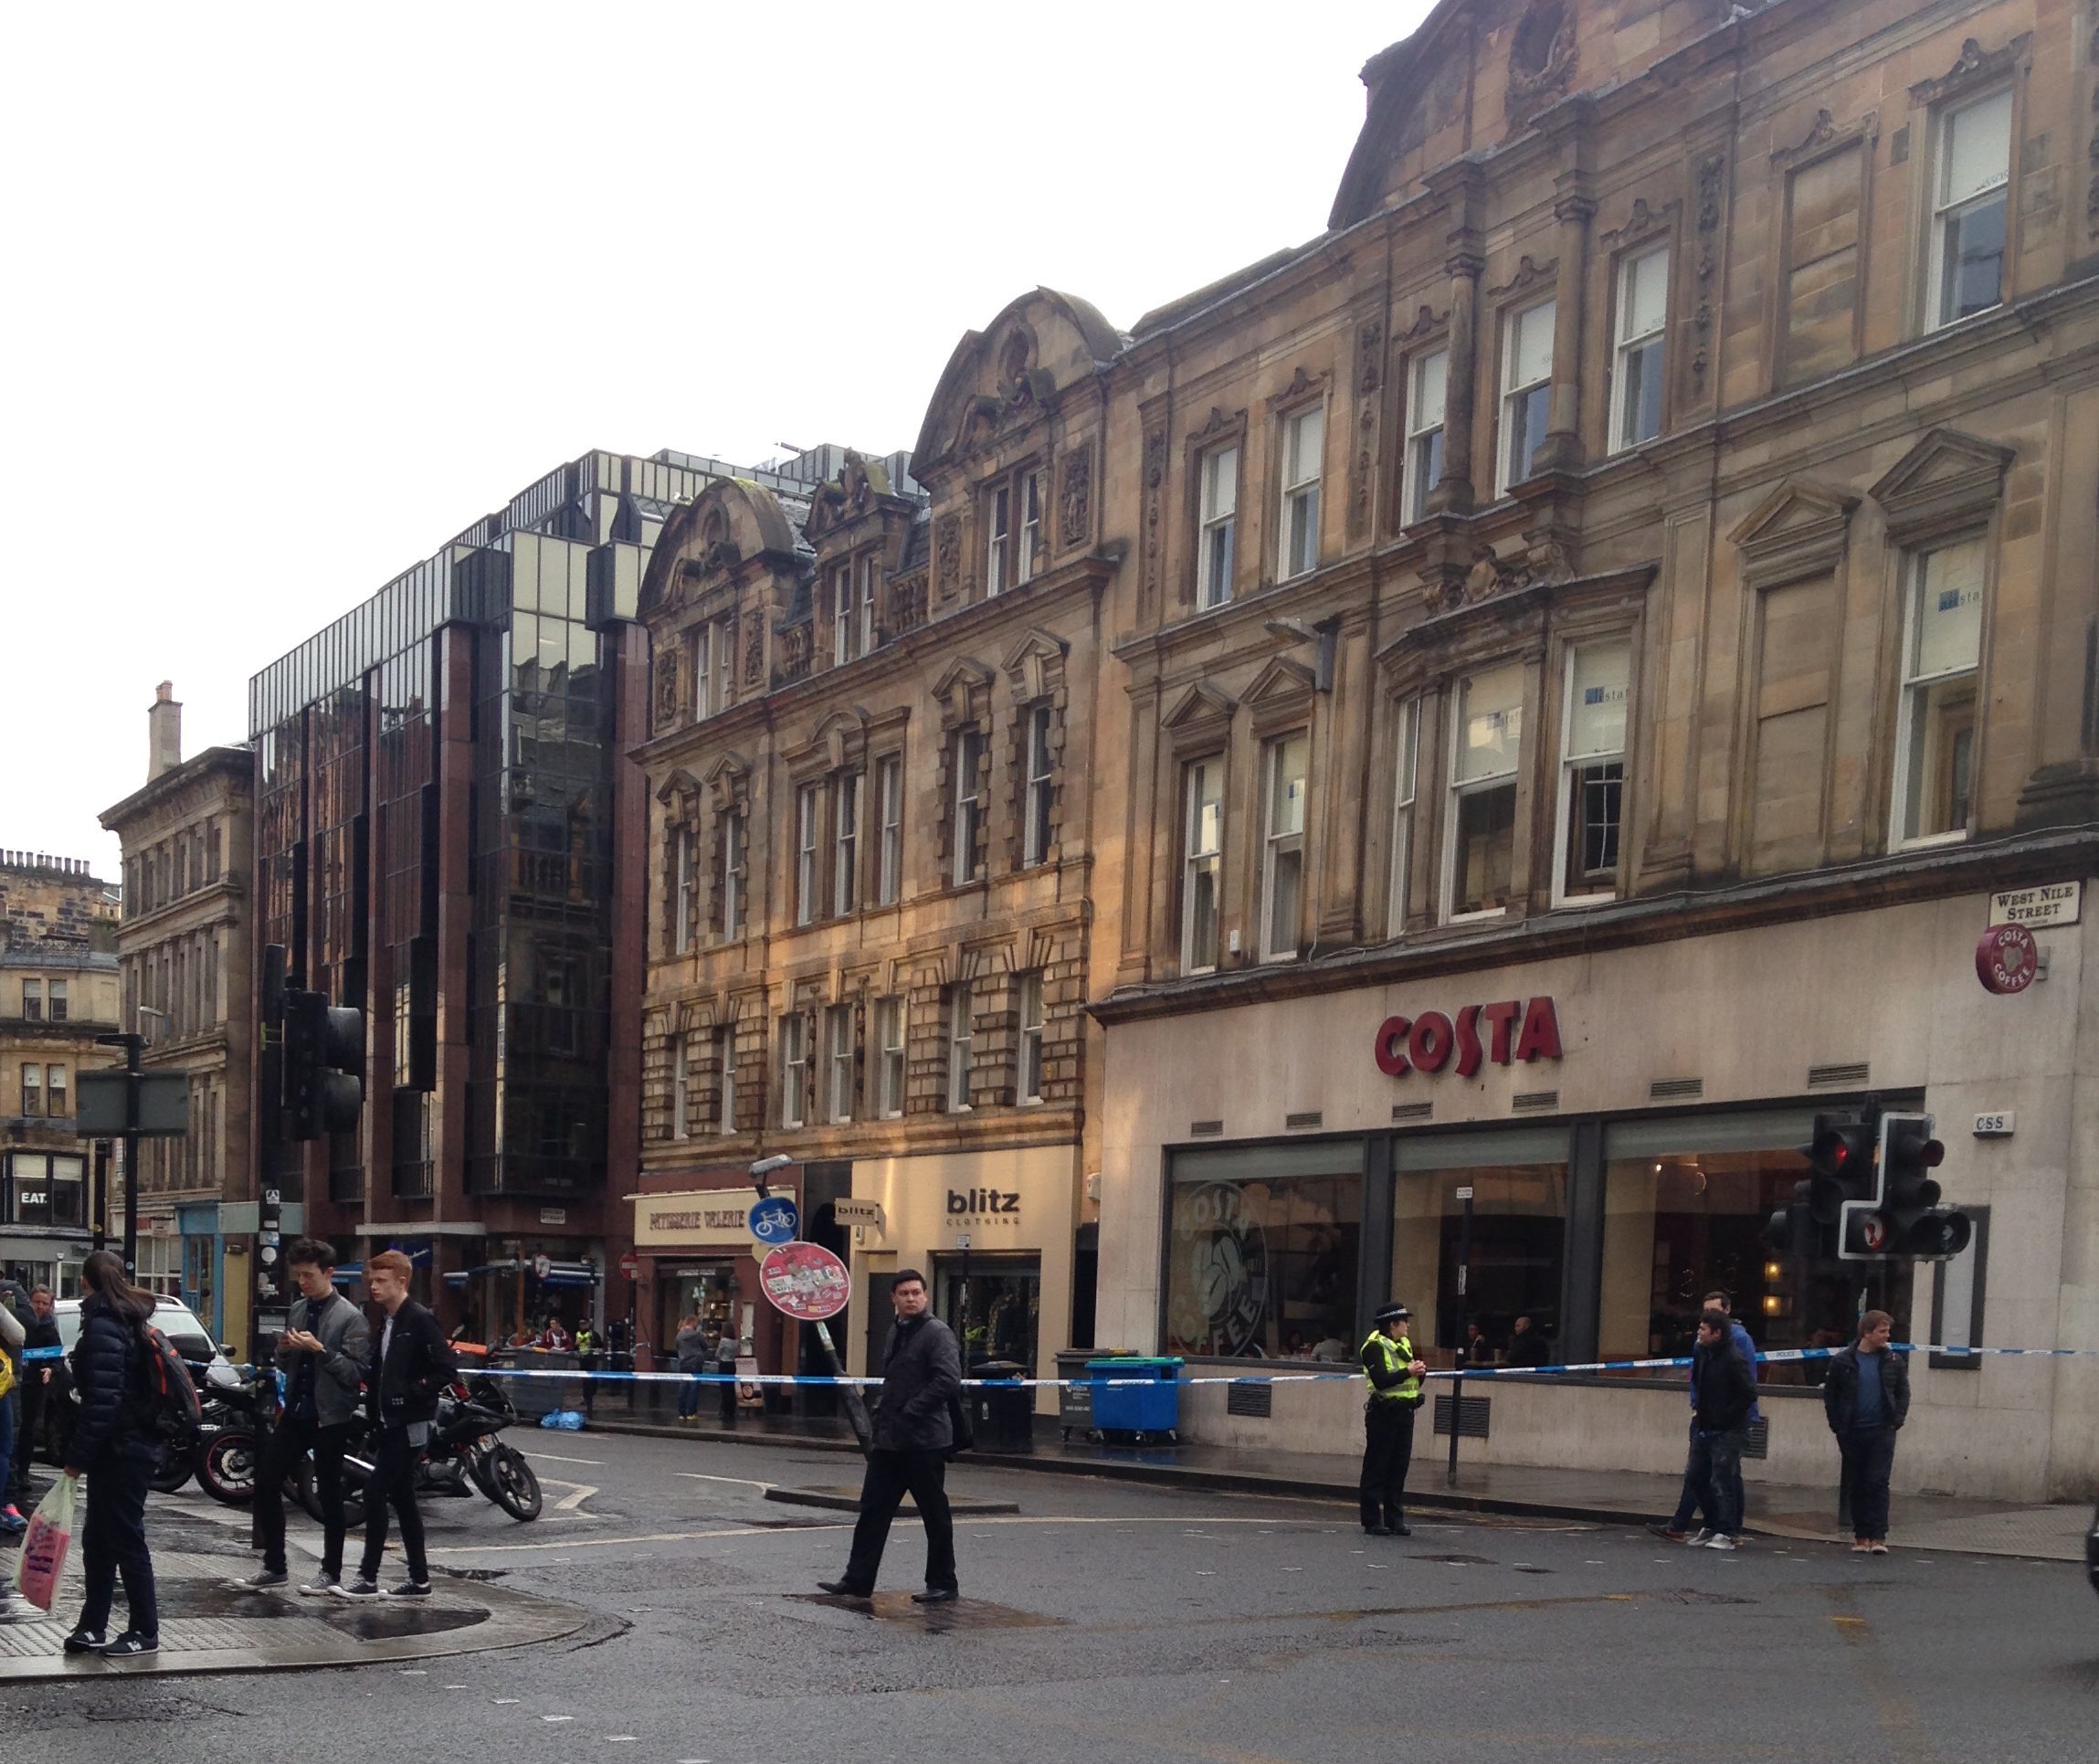 West Nile St was cordoned off yesterday as police dealt with the incident (Gillian Furmage/DC Thomson)